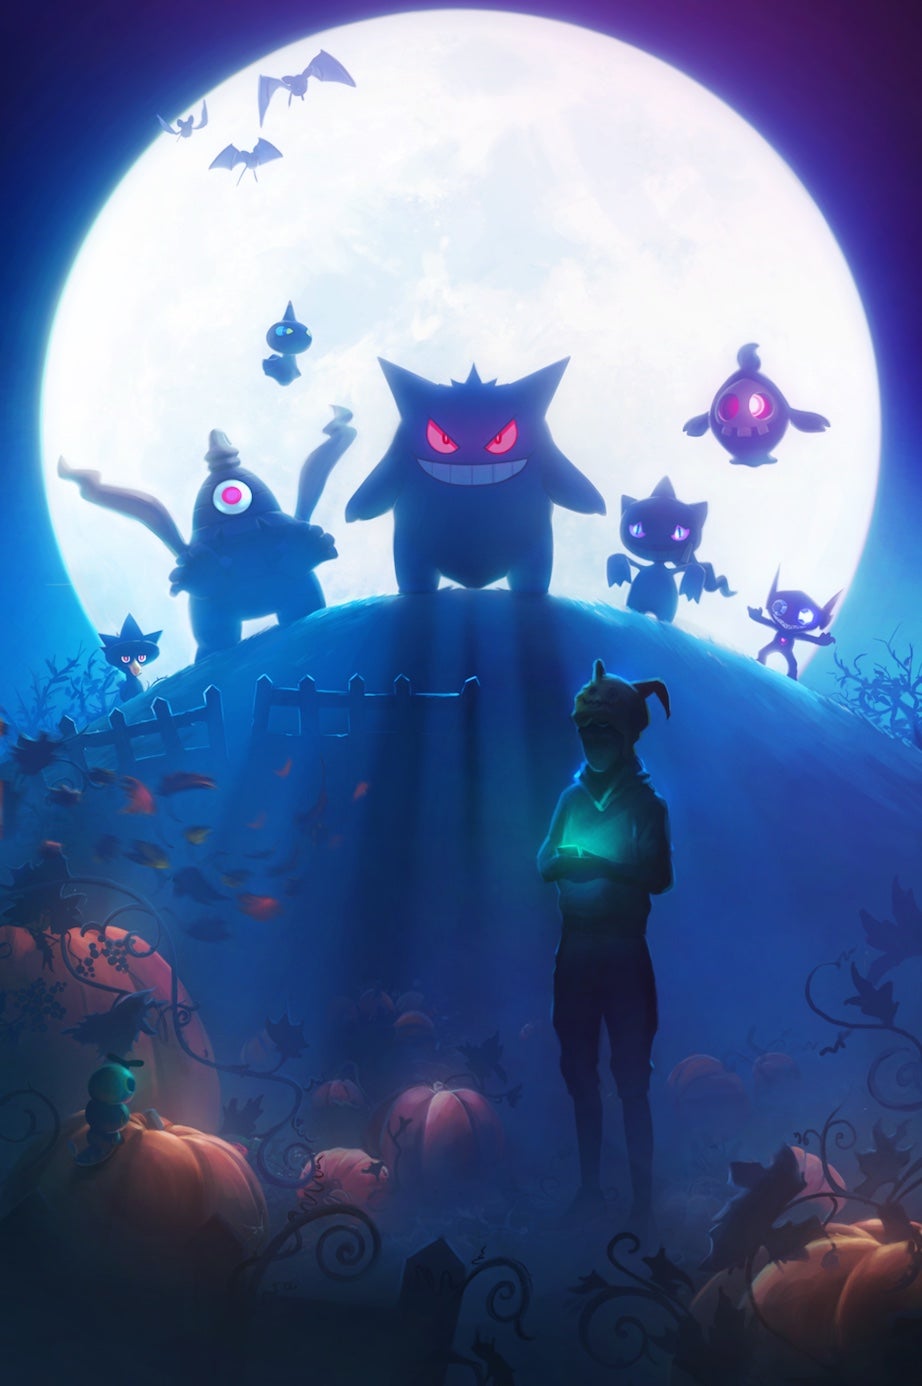 Leaked loading screen for the 2017 Pokemon Go Halloween event - Pokemon Go leak reveals generation 3 pocket monsters that could be added during Halloween event